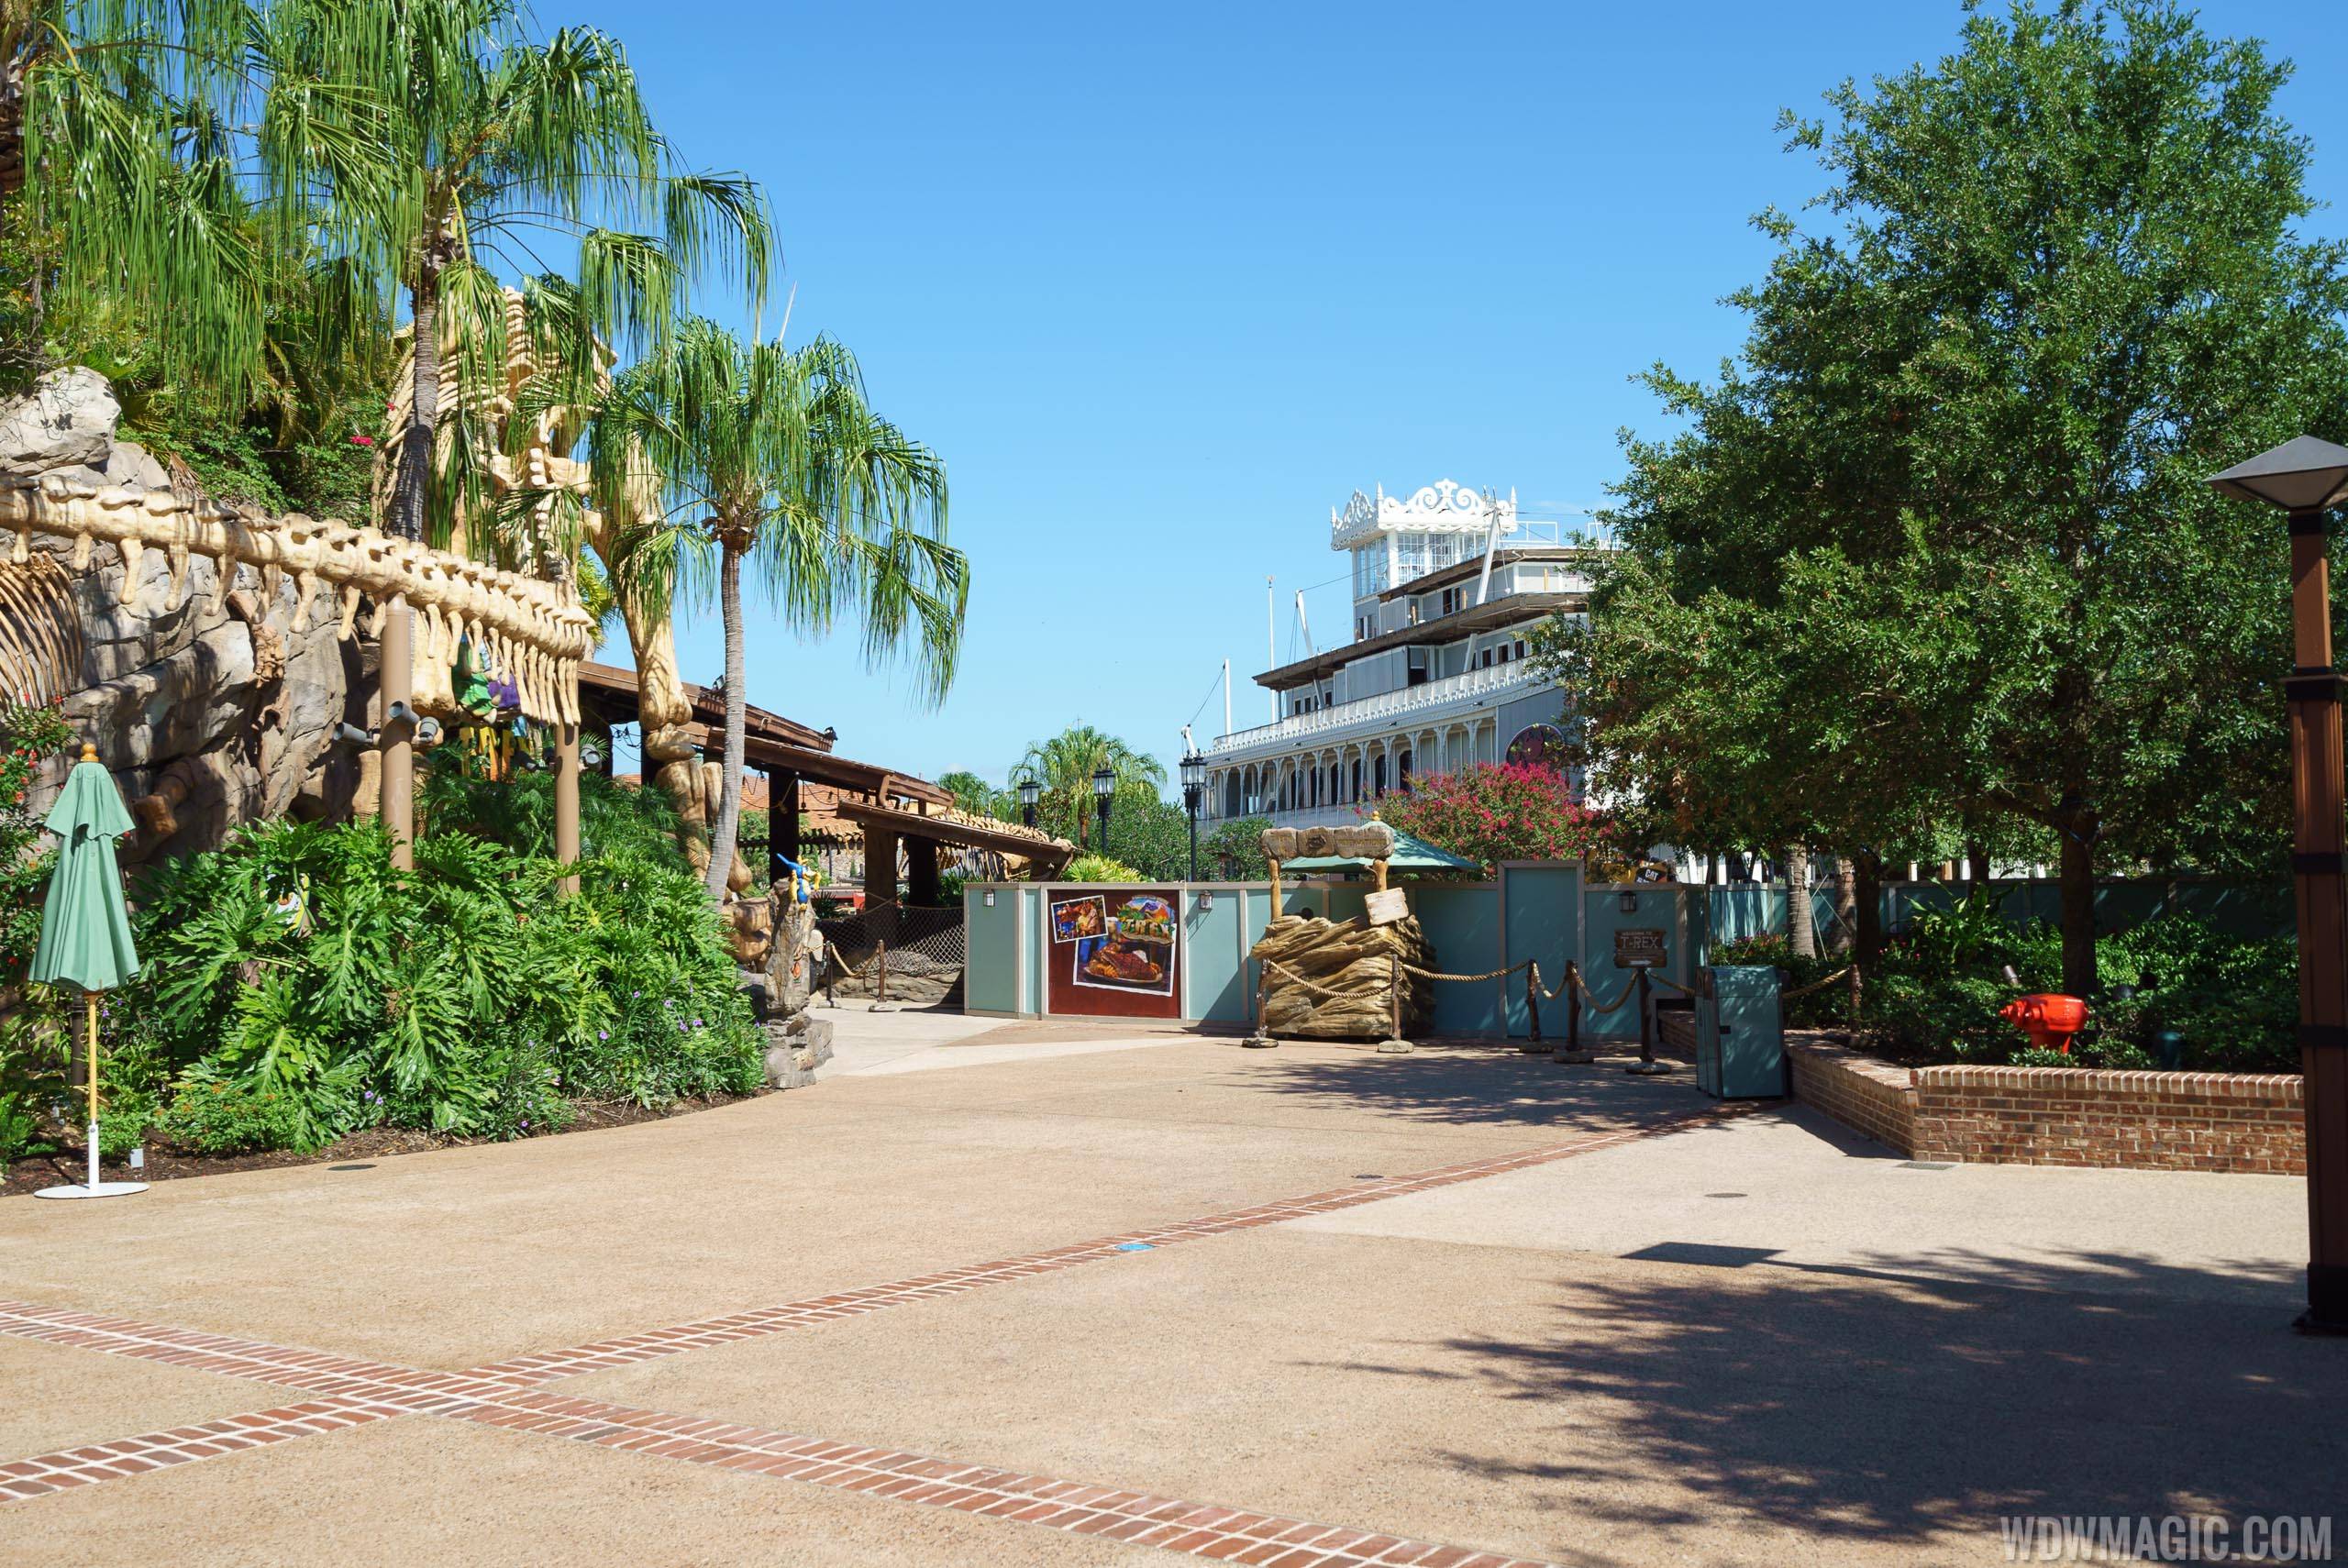 PHOTOS - Bridge linking The Landing to the Marketplace closed at Disney Springs